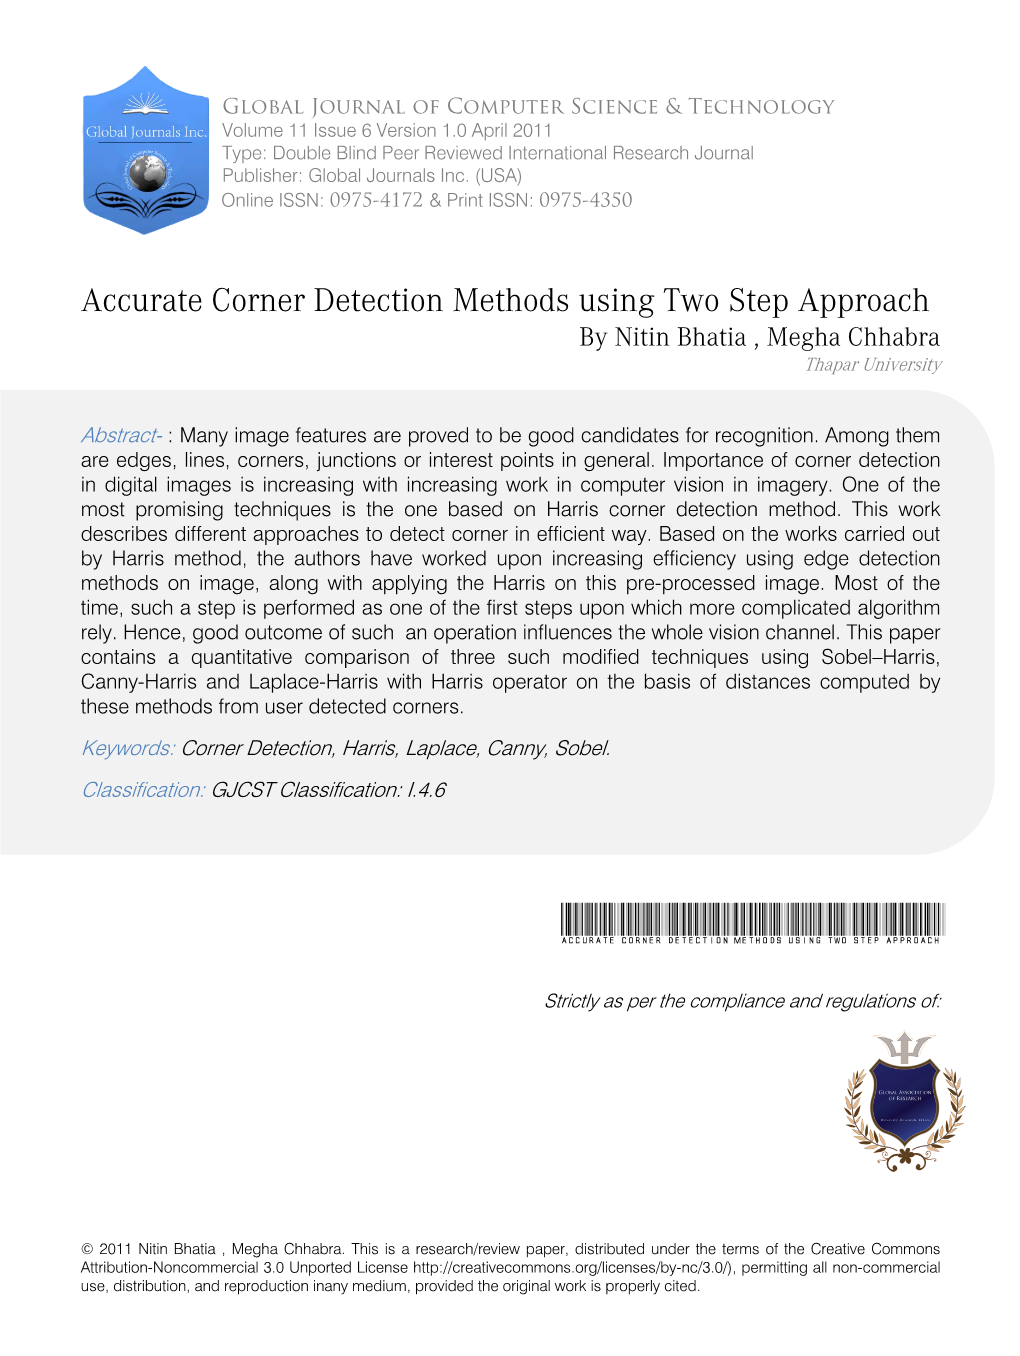 Accurate Corner Detection Methods Using Two Step Approach by Nitin Bhatia , Megha Chhabra Thapar University